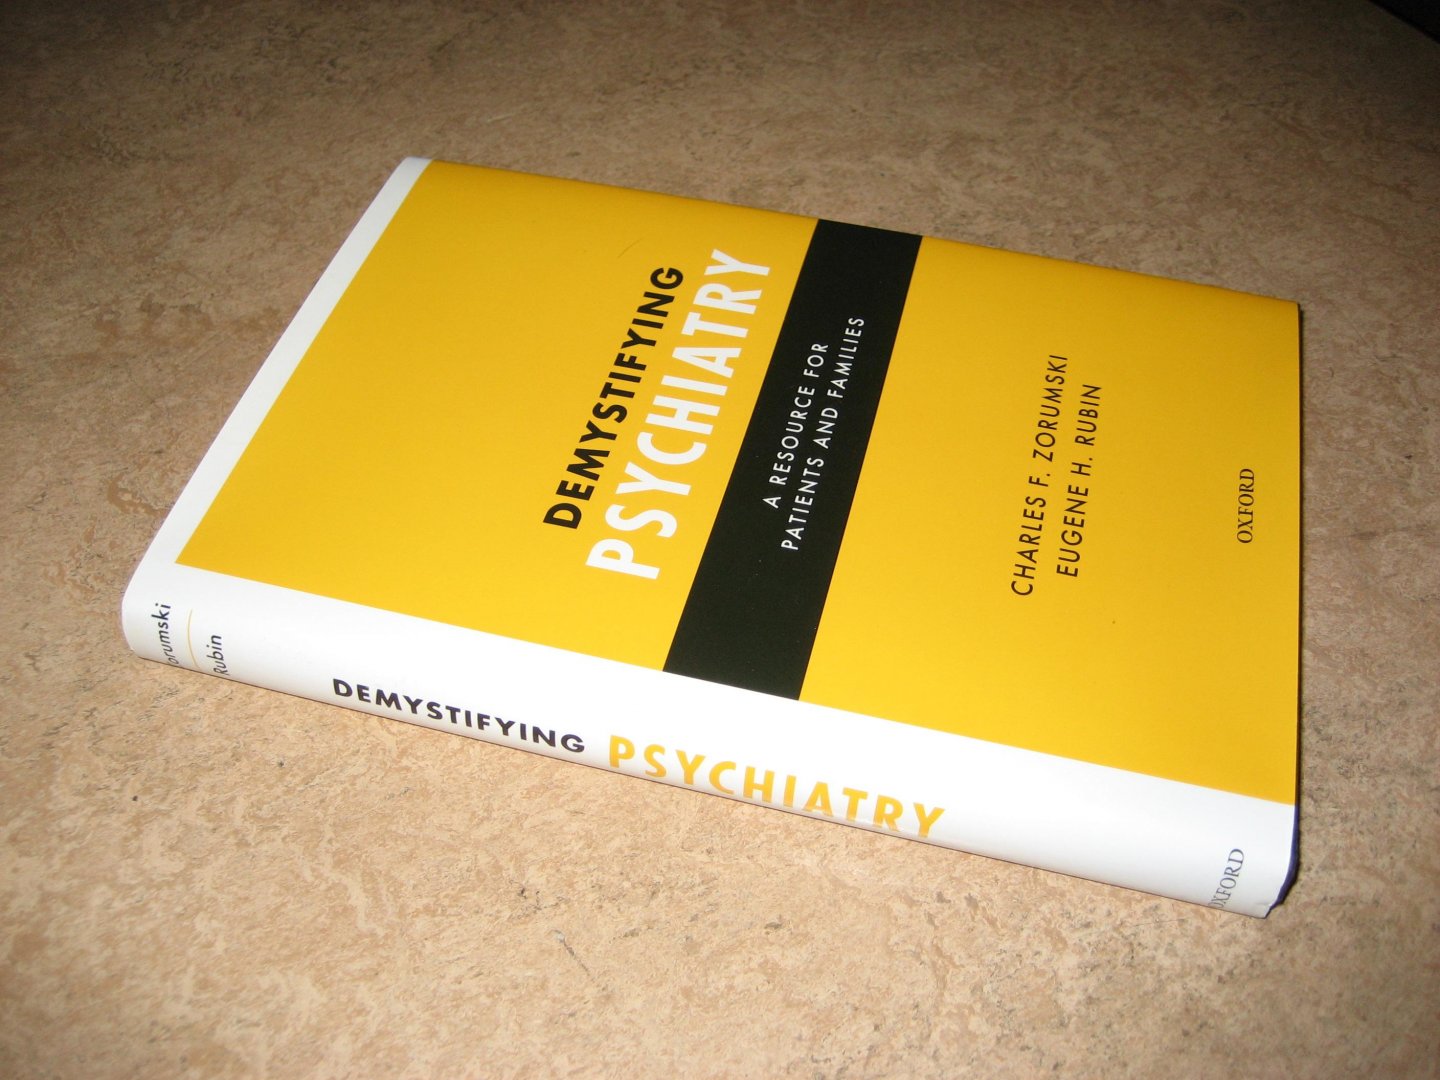 Zorumski, Charles F. & Rubin, Eugene H. - Demystifying Psychiatry. A Resource for Patients and Families